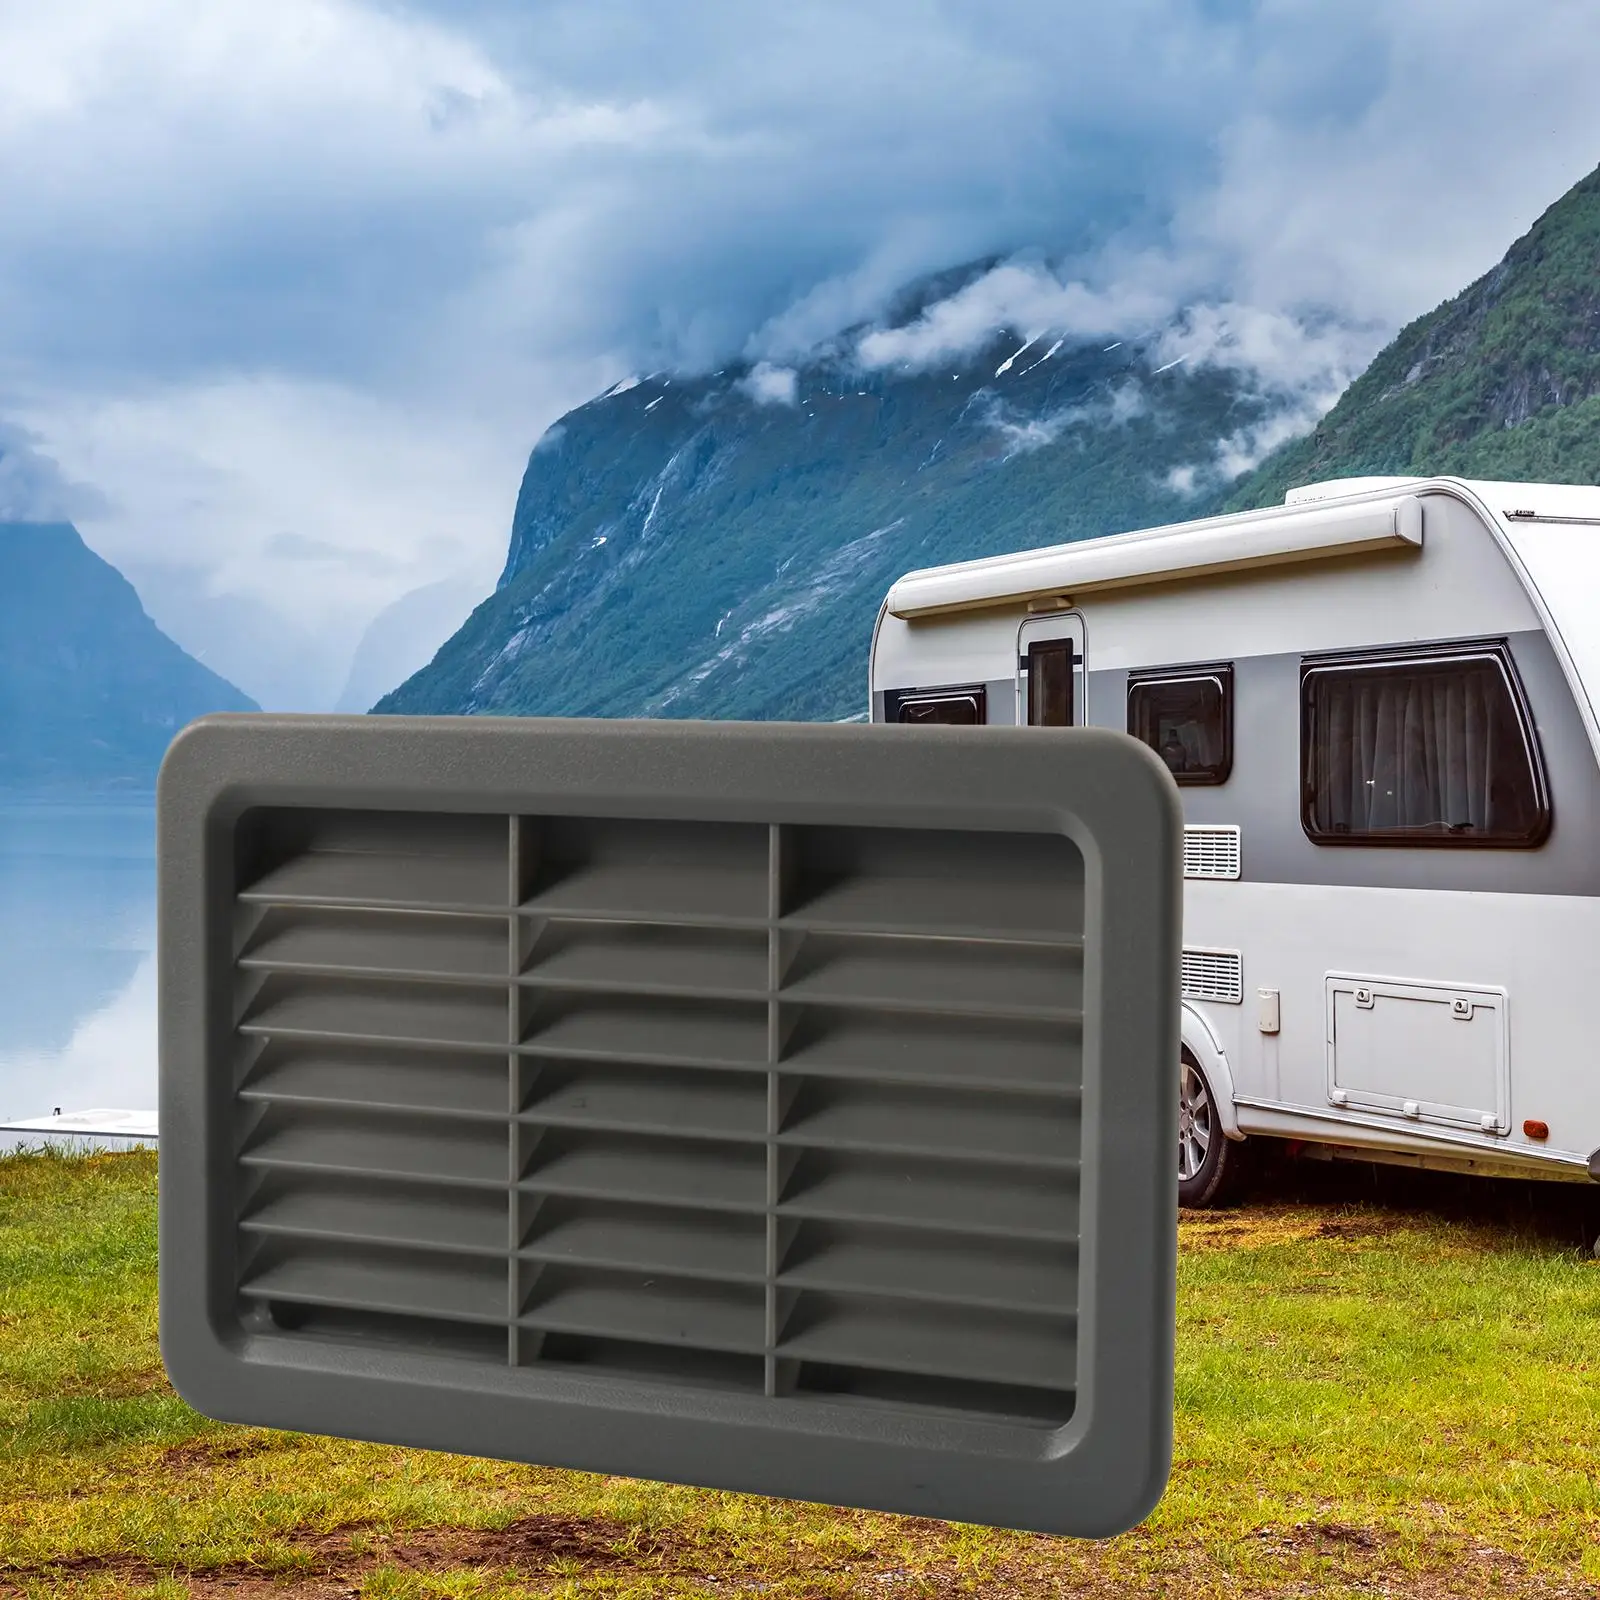 Air Vent Grille Supply Black Durable Easily Install High Performance Direct Replaces for RV Truck Camping Traveling Trailer